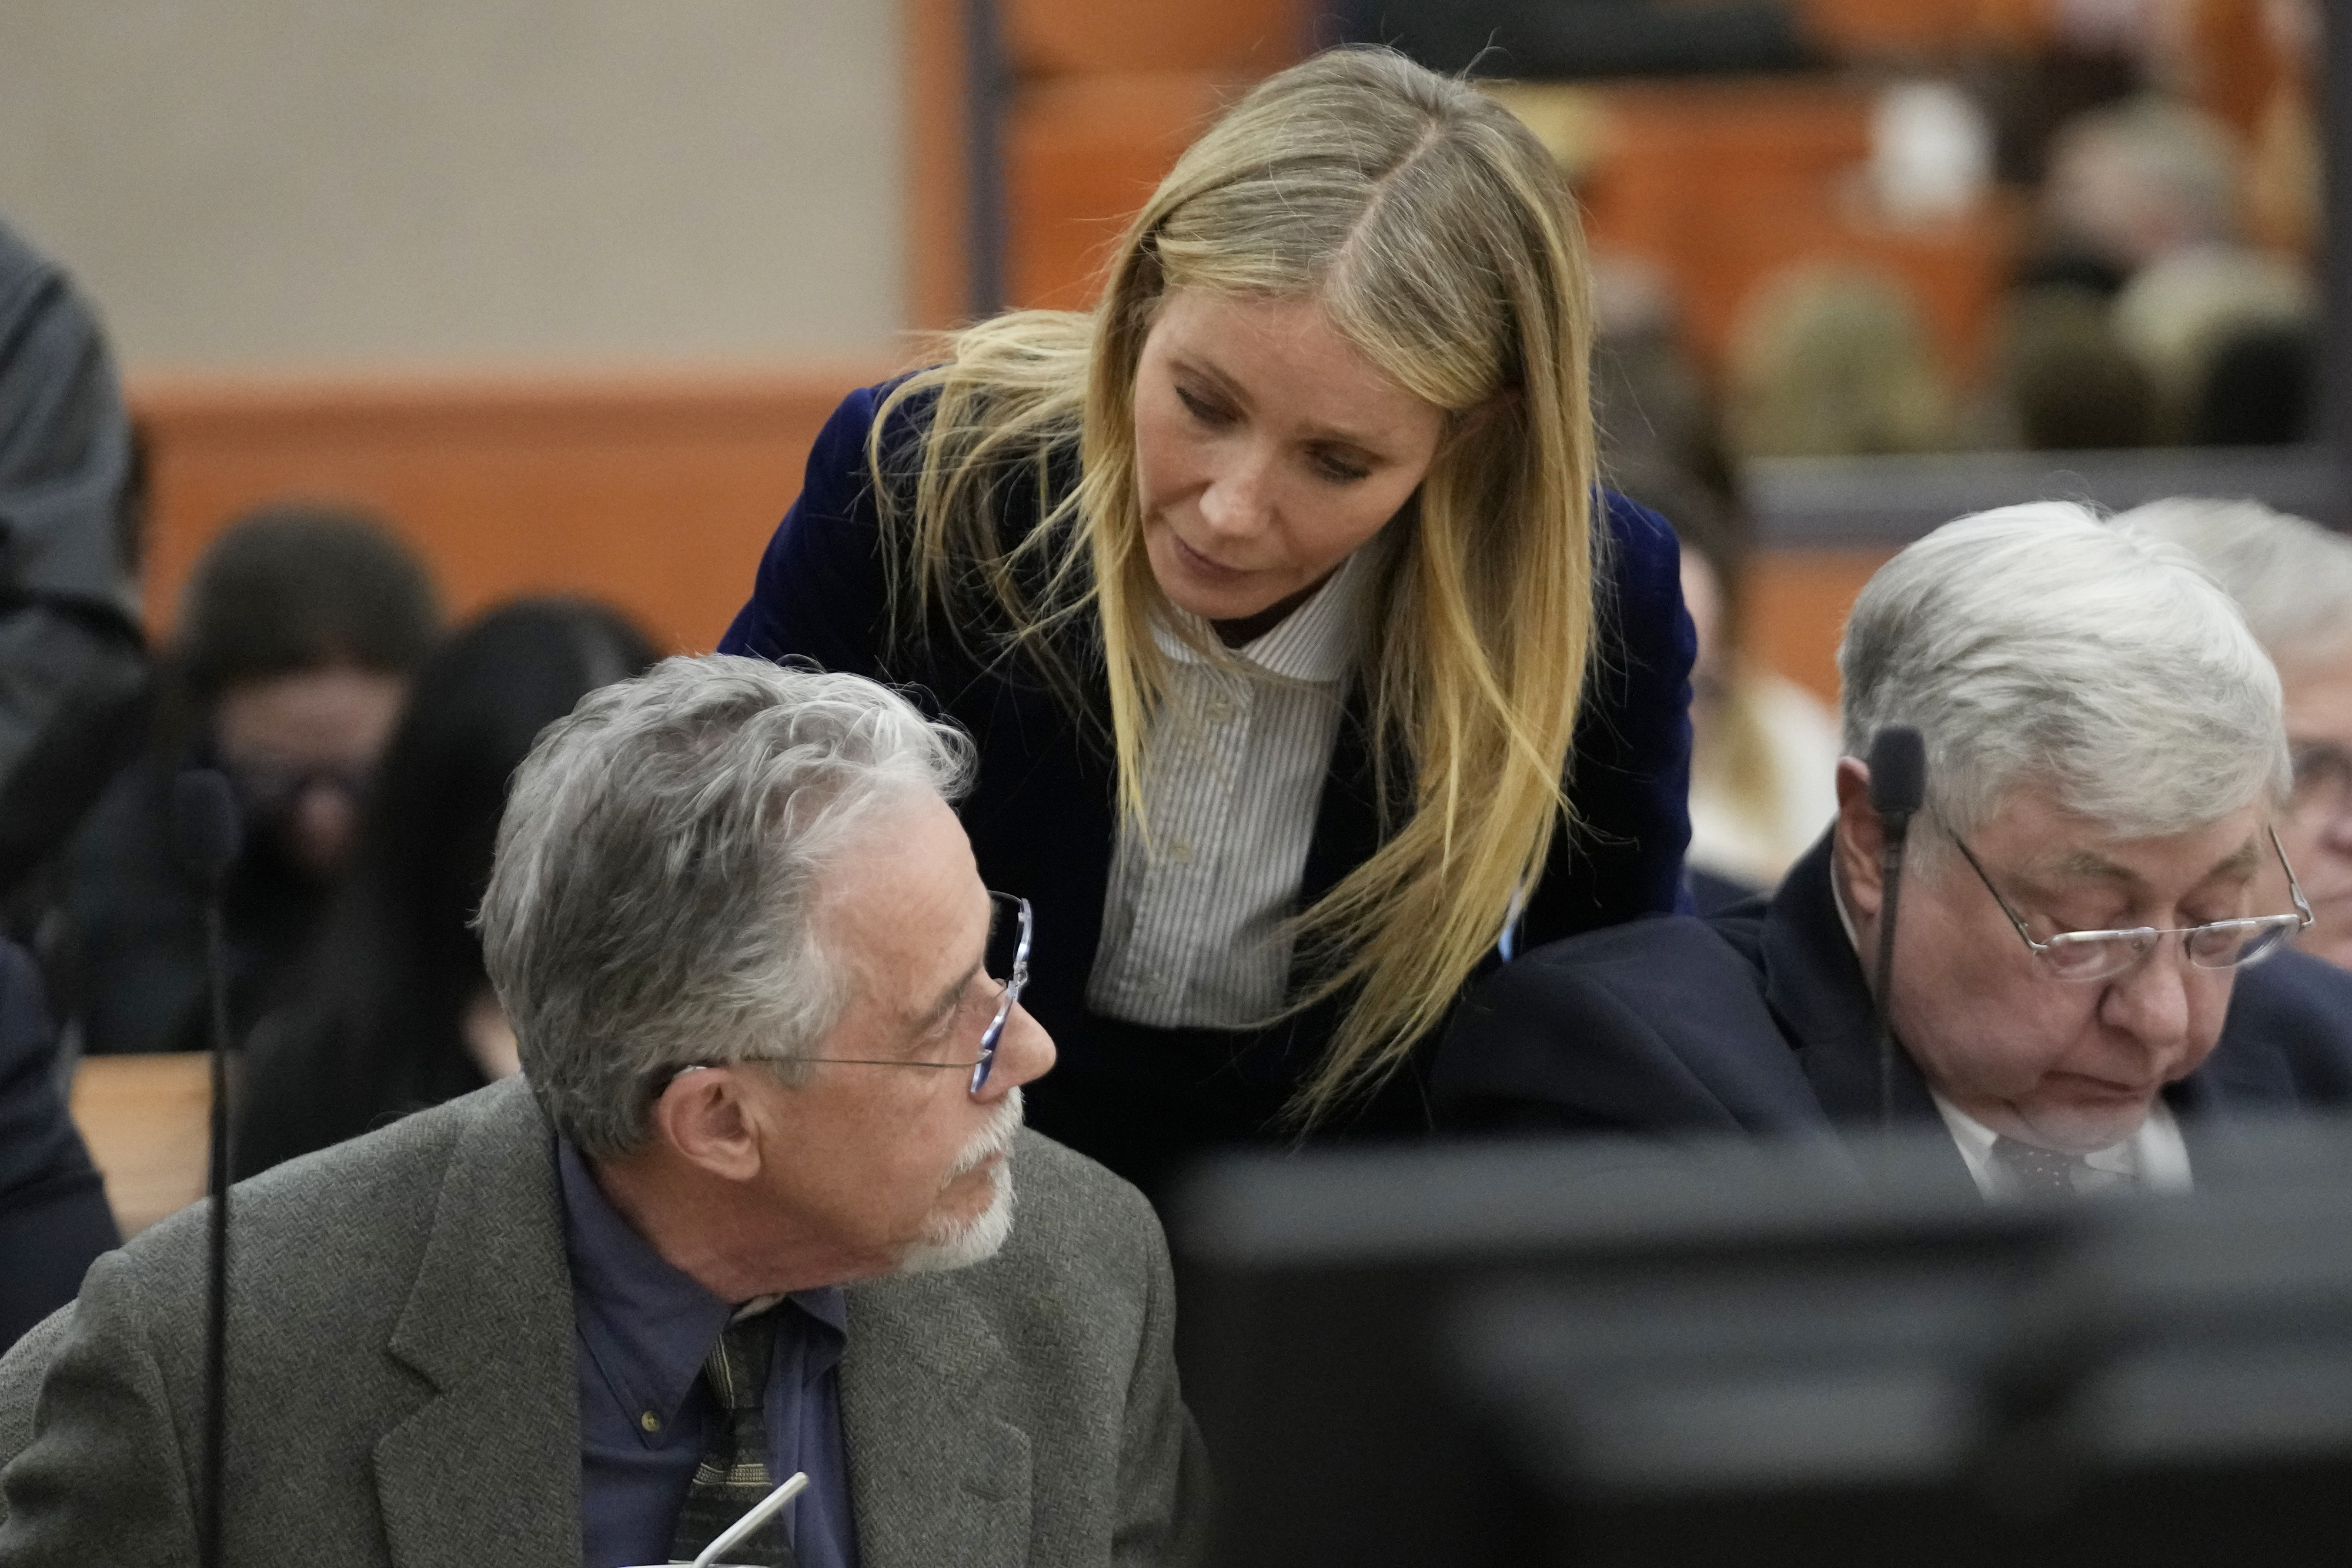 Gwyneth leaning over a seated Terry in court